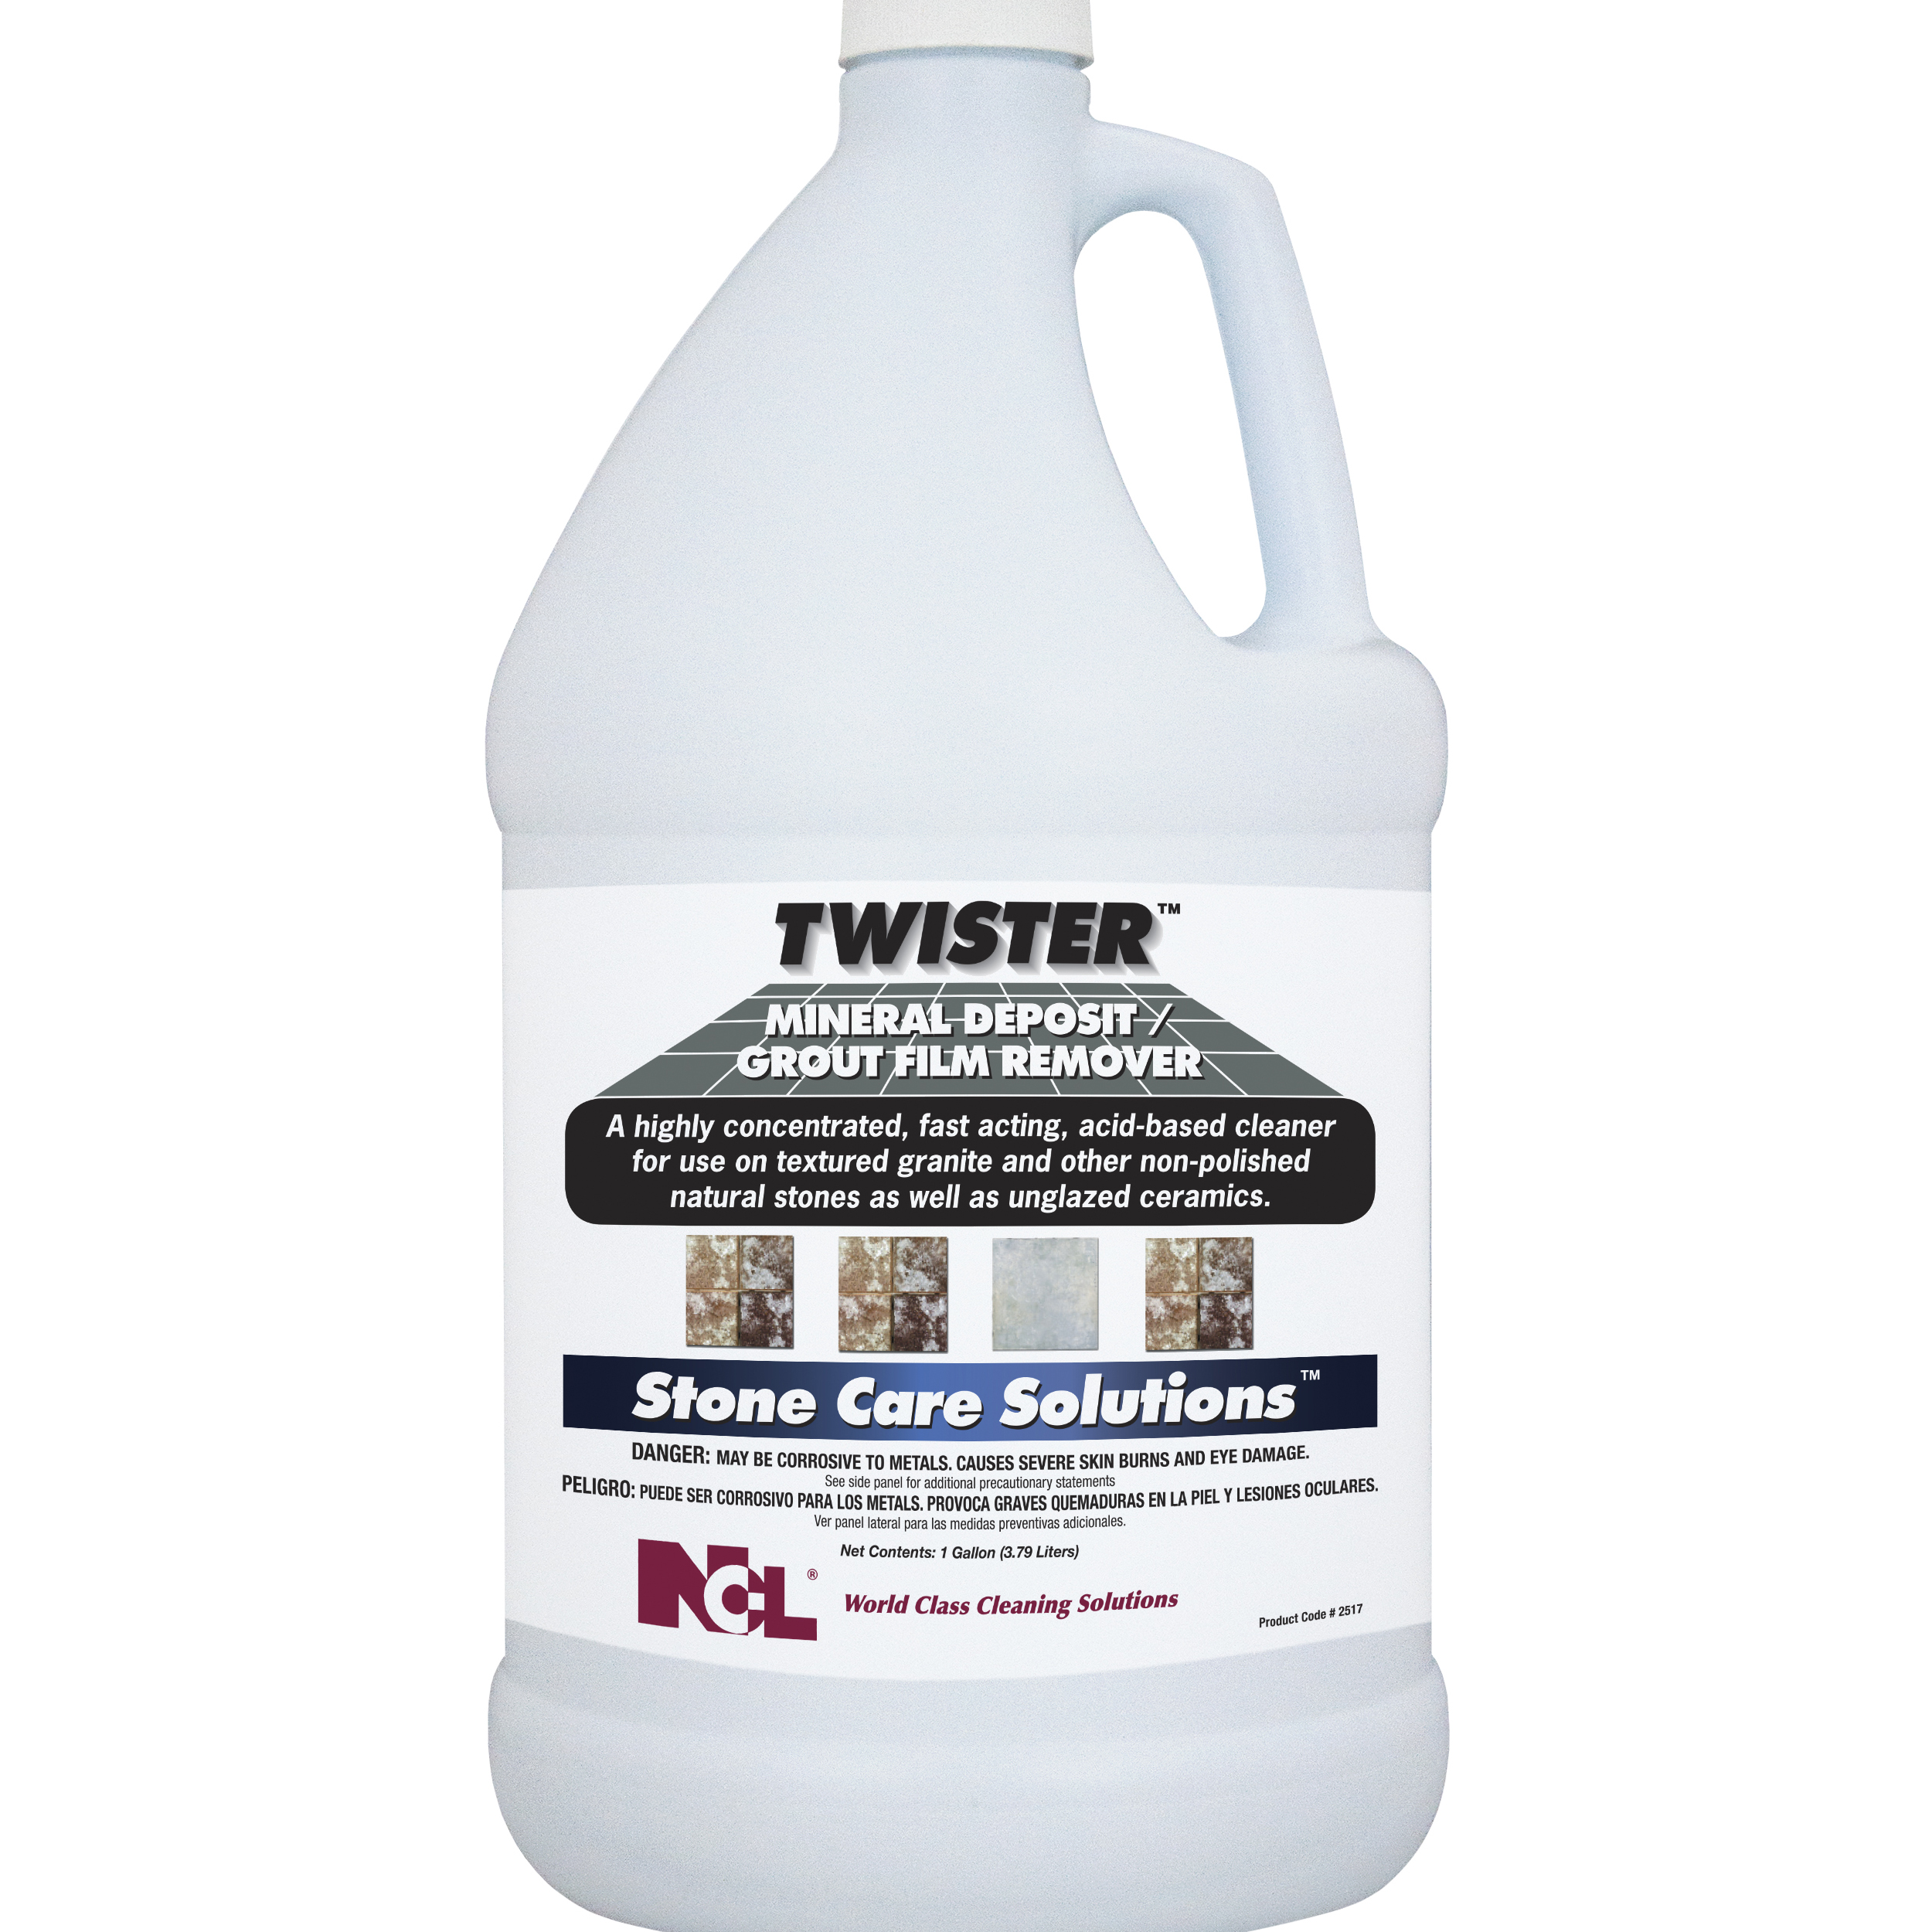  TWISTER Mineral Deposit / Grout Film Remover 4/1 Gal. Case (NCL2517) 